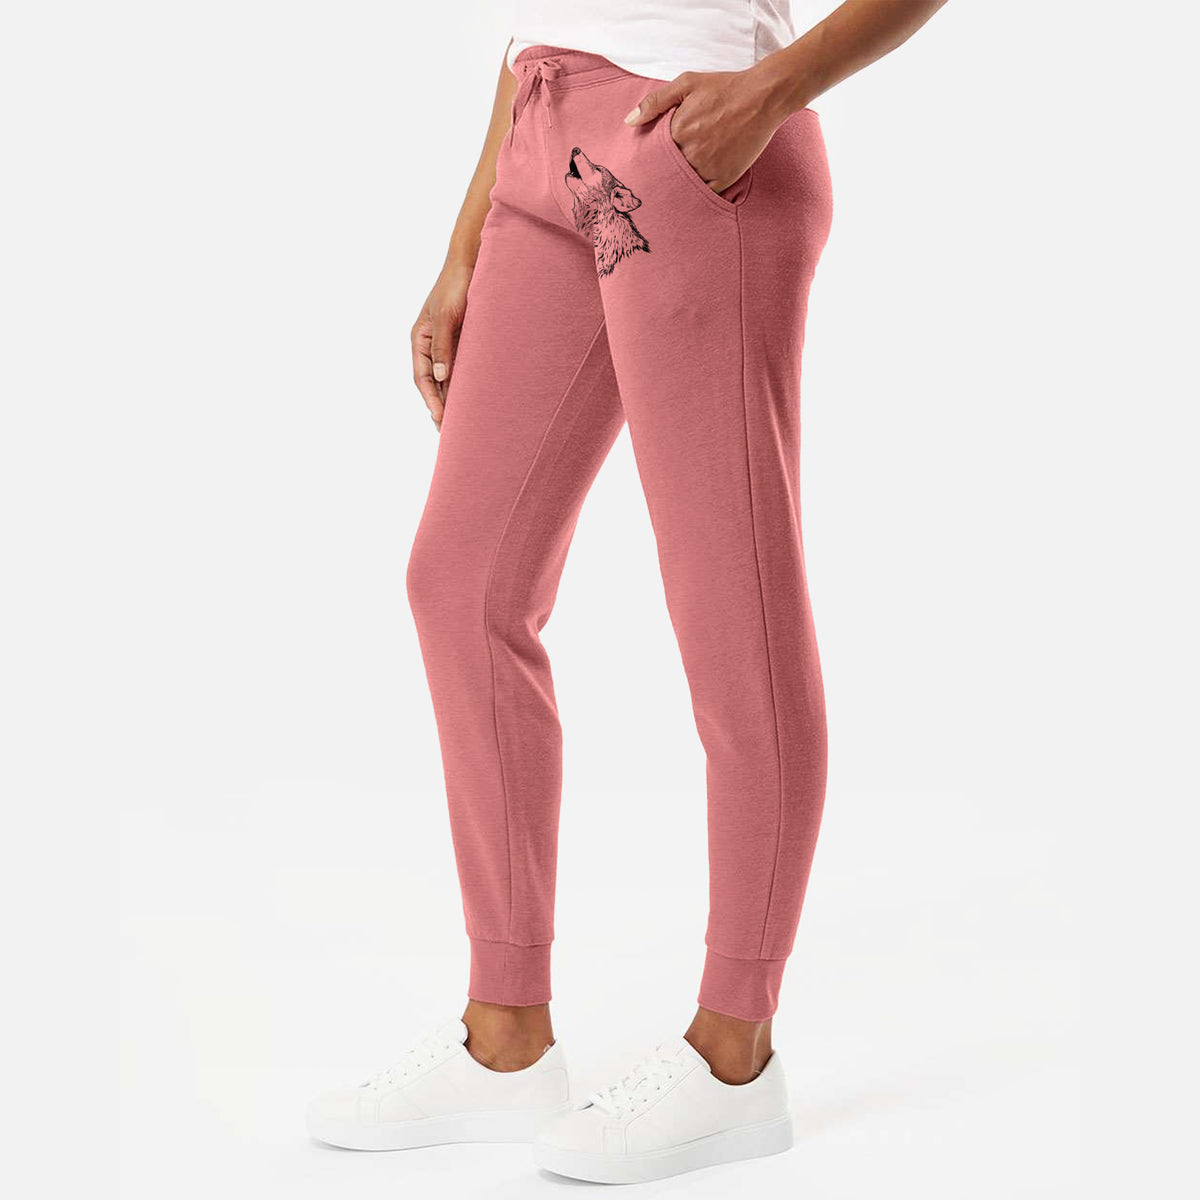 Canis lupus - Grey Wolf Howling - Women&#39;s Cali Wave Jogger Sweatpants